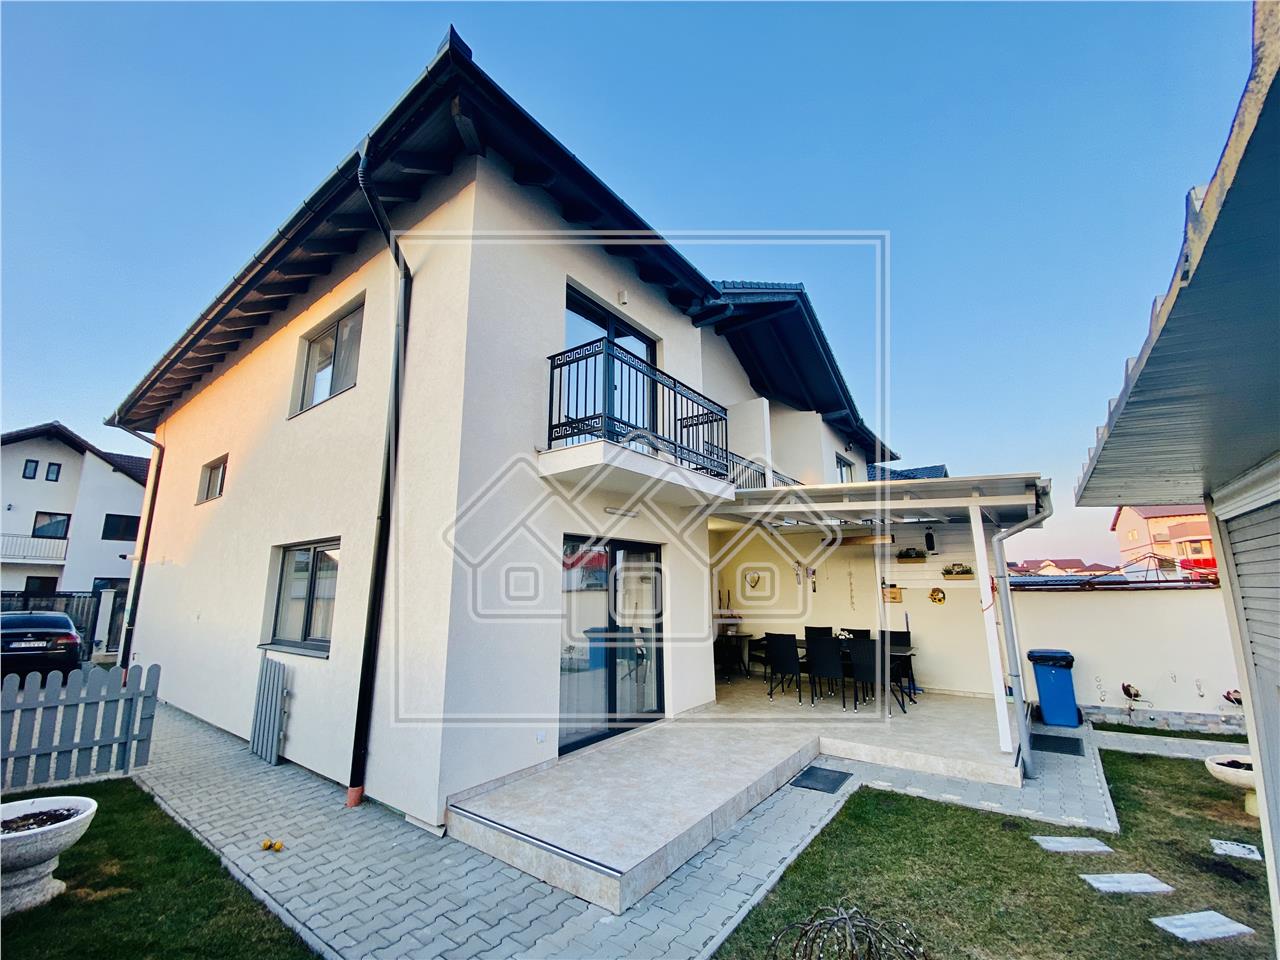 House for sale in Sibiu - duplex type - furnished and equipped - Carti